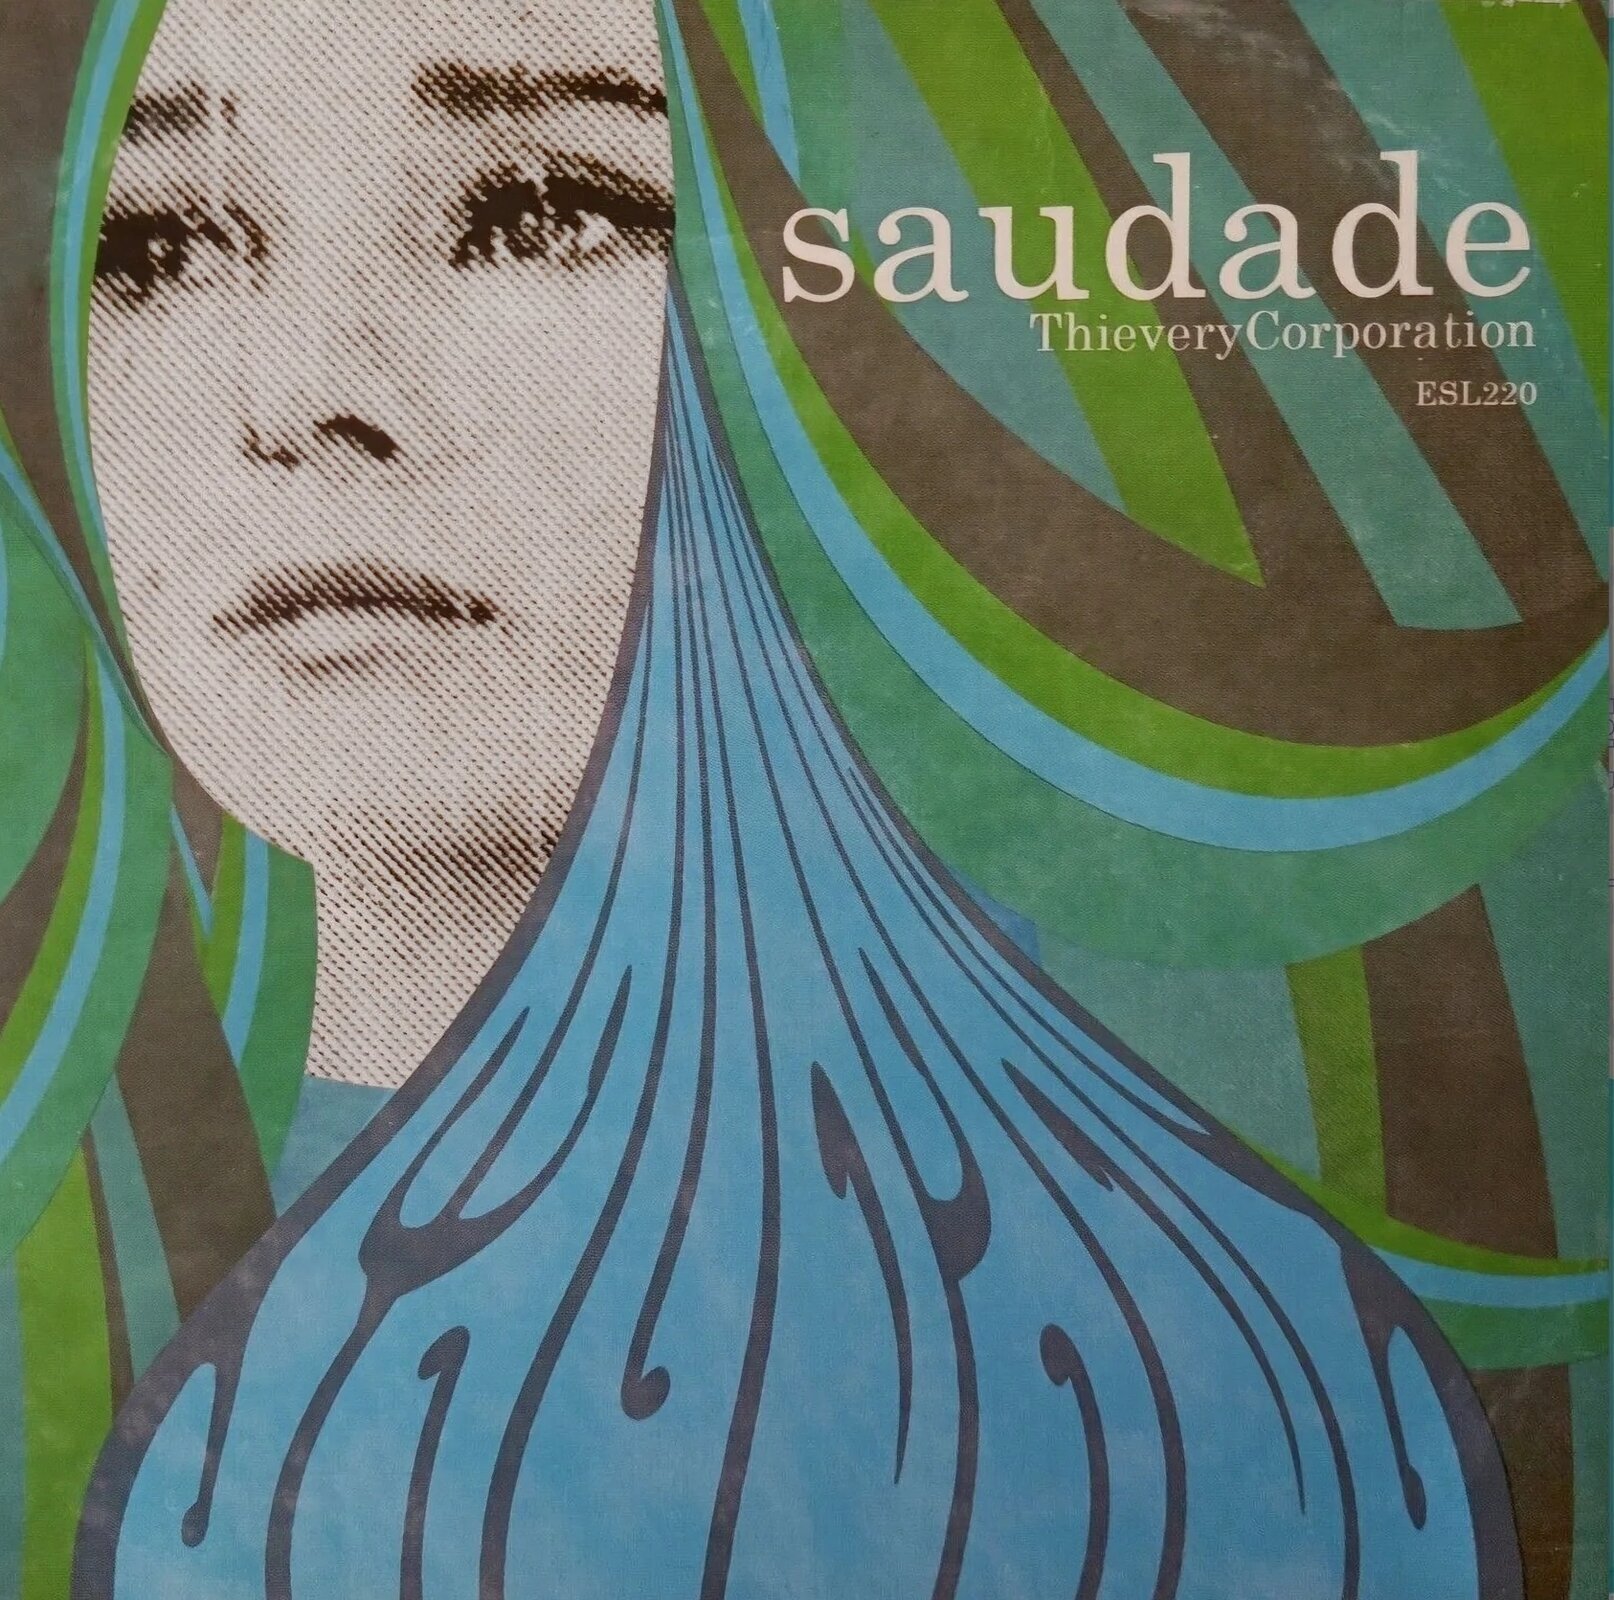 Disco in vinile Thievery Corporation - Saudade (Translucent Light Blue Coloured) (10th Anniversary Edition) (LP)